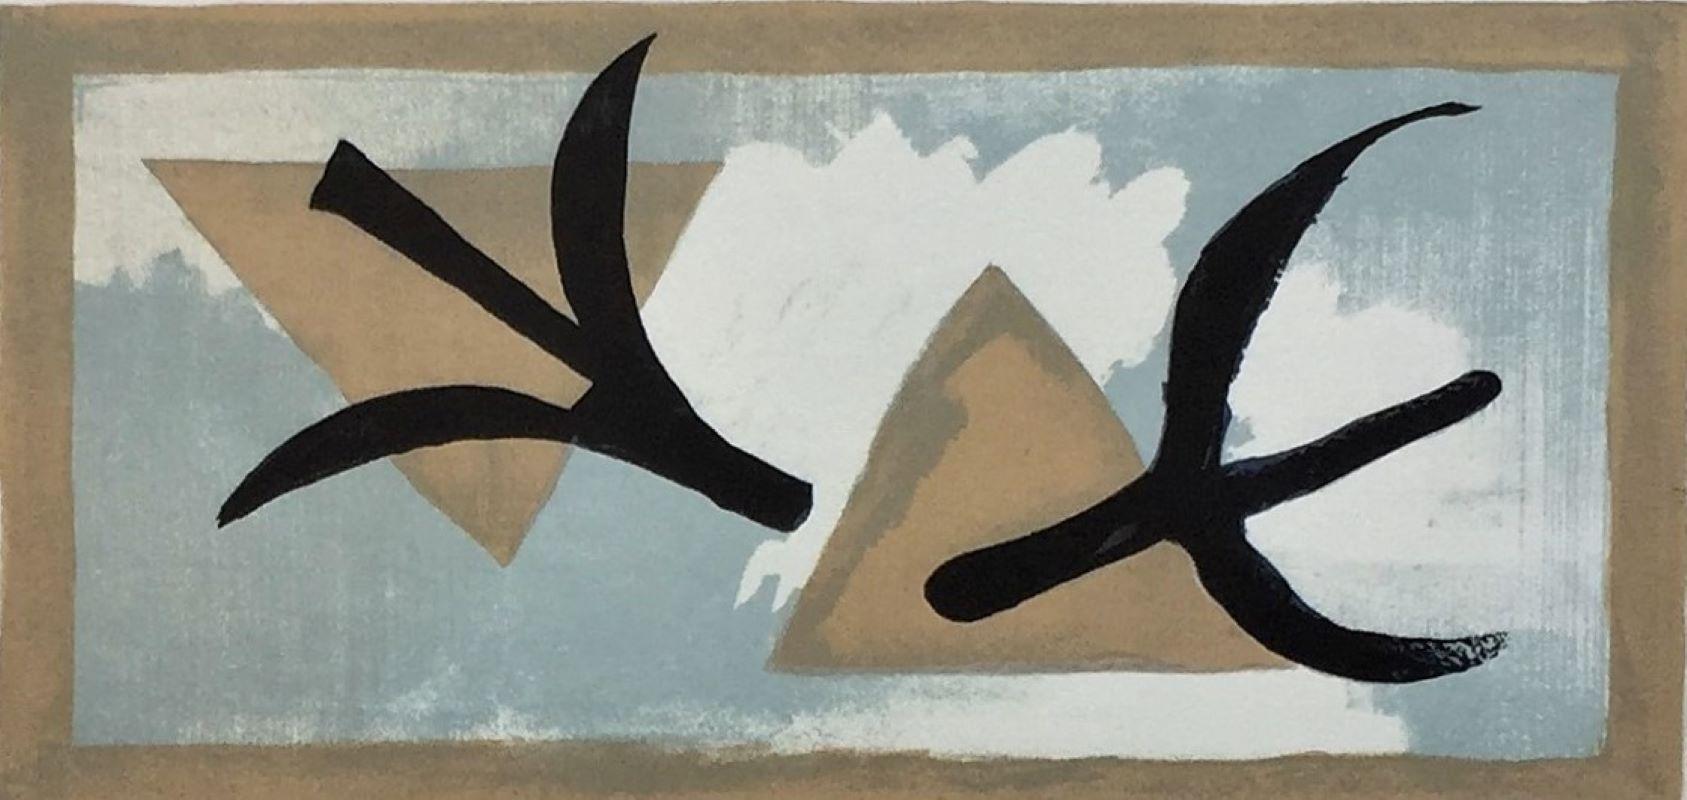 (after) Georges Braque Landscape Print - Les martinets (black swifts)